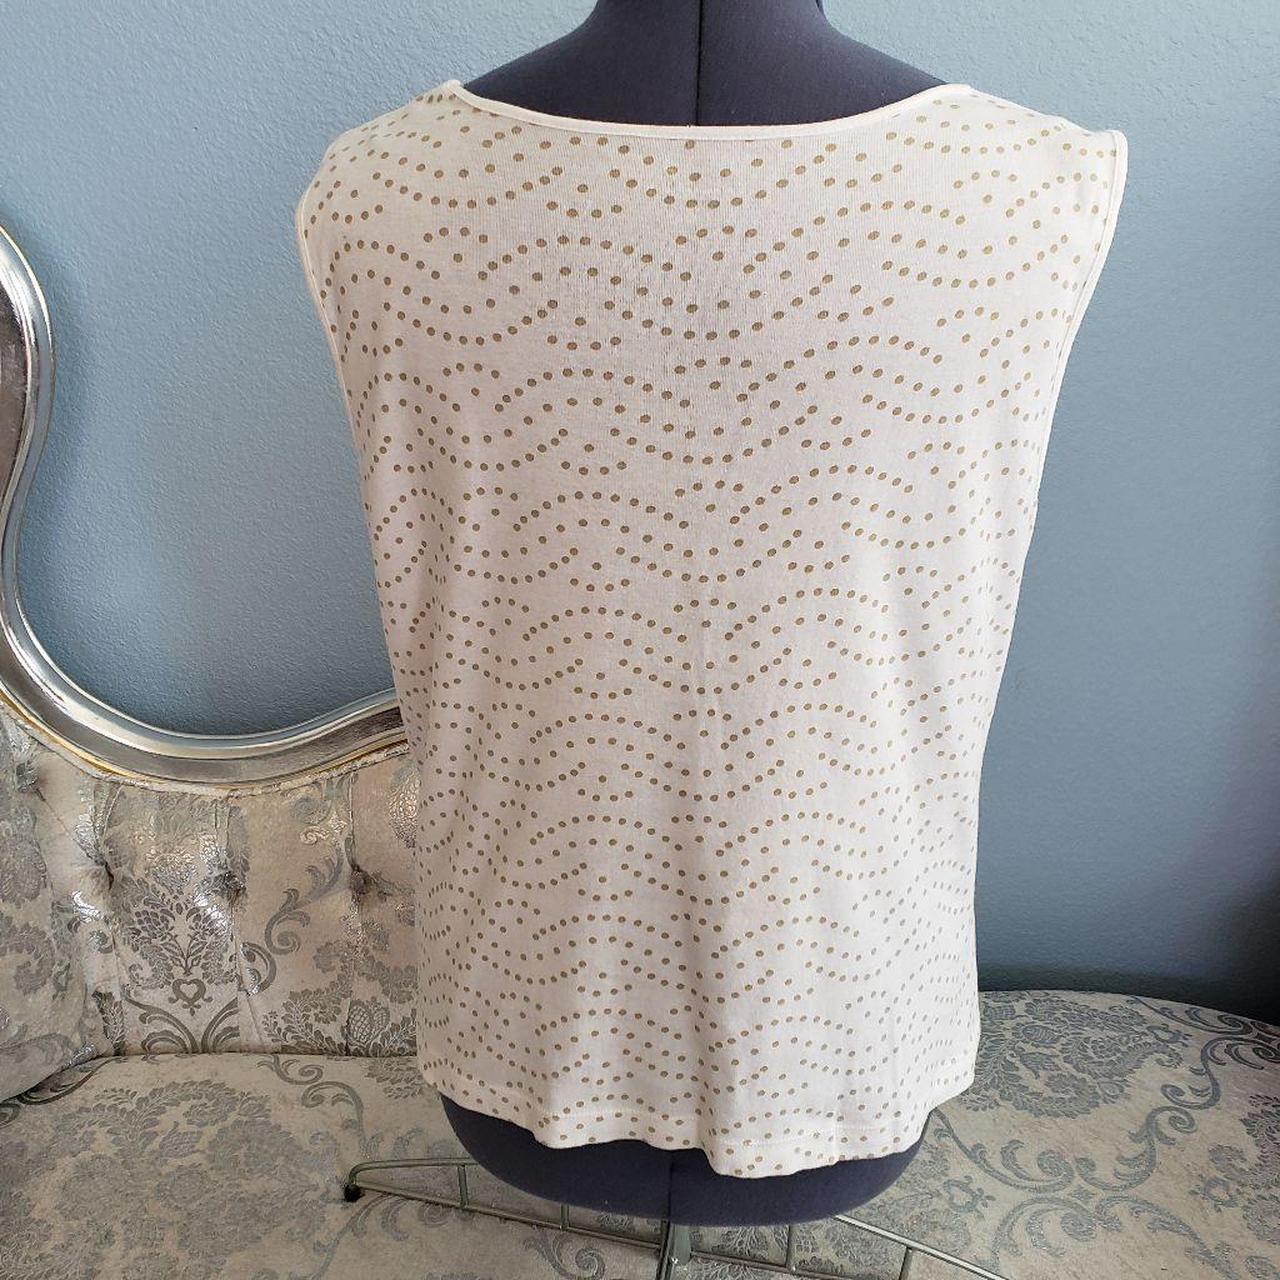 Product Image 3 - EUC women's white with patterned